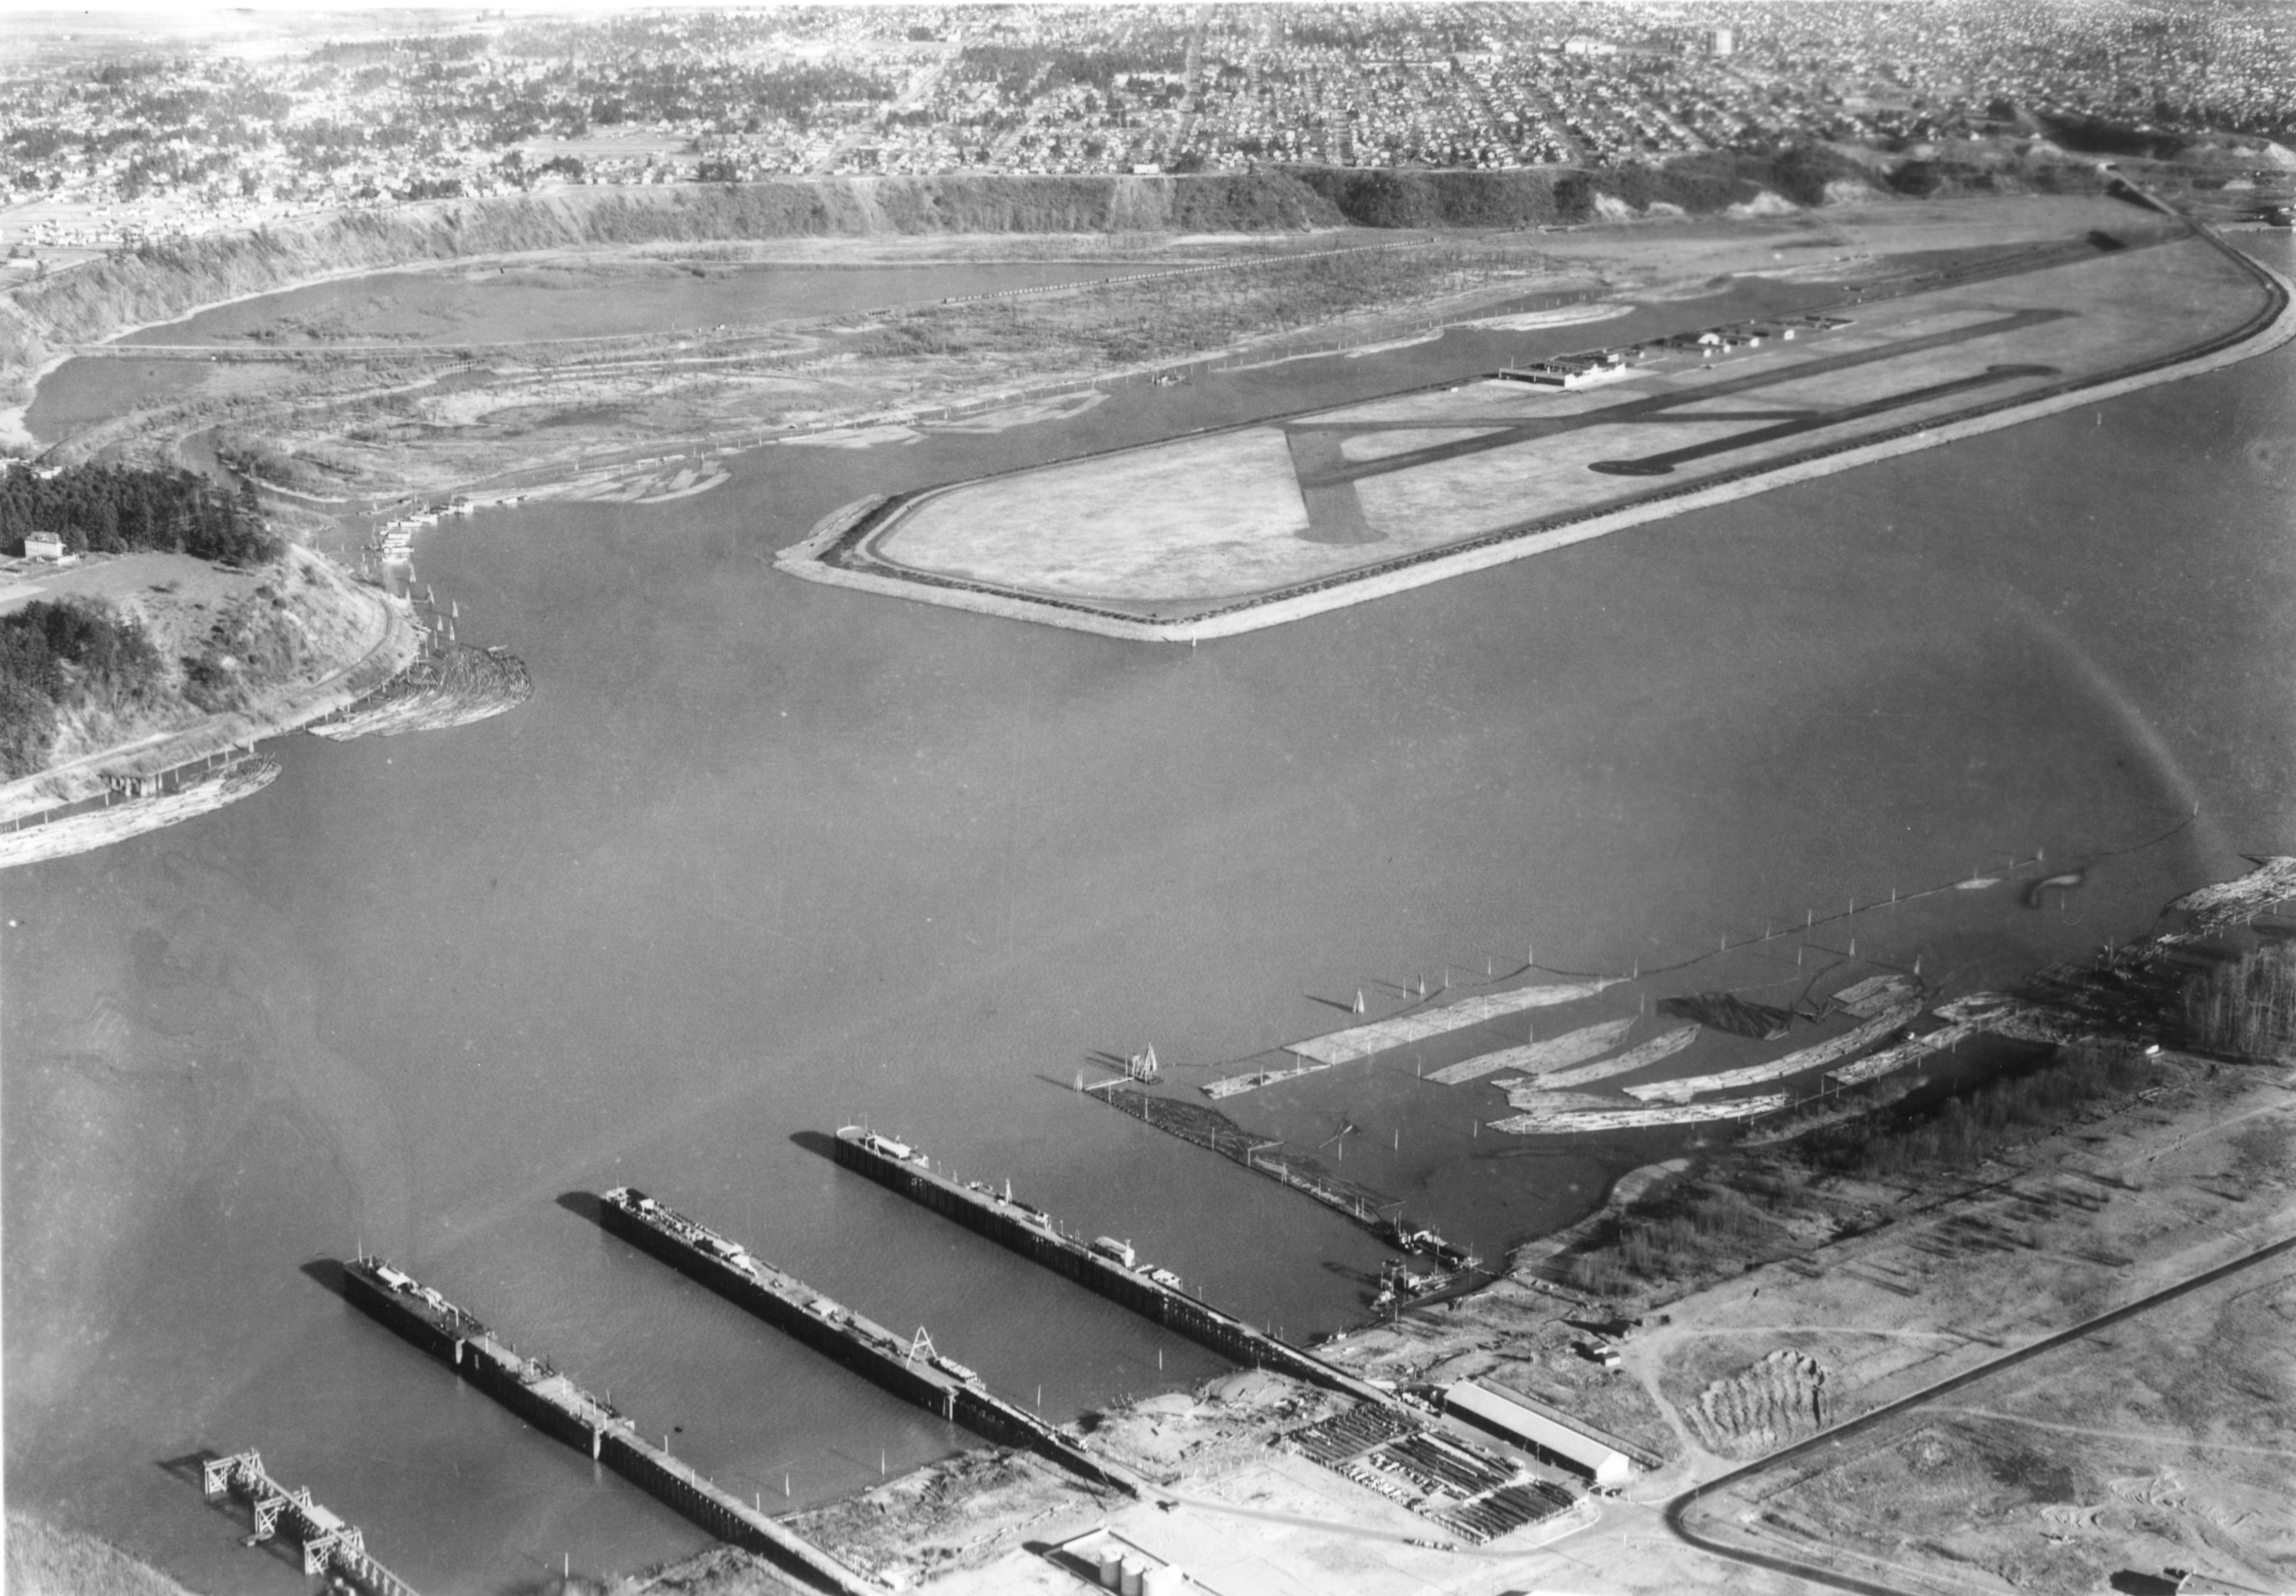 Public Works Administration (Archival) - Public Works Administrator - Photographs - A2005-005.1397.2 Aerial view of Swan Island Airport Mocks Bottom and Willbridge Docks.JPG